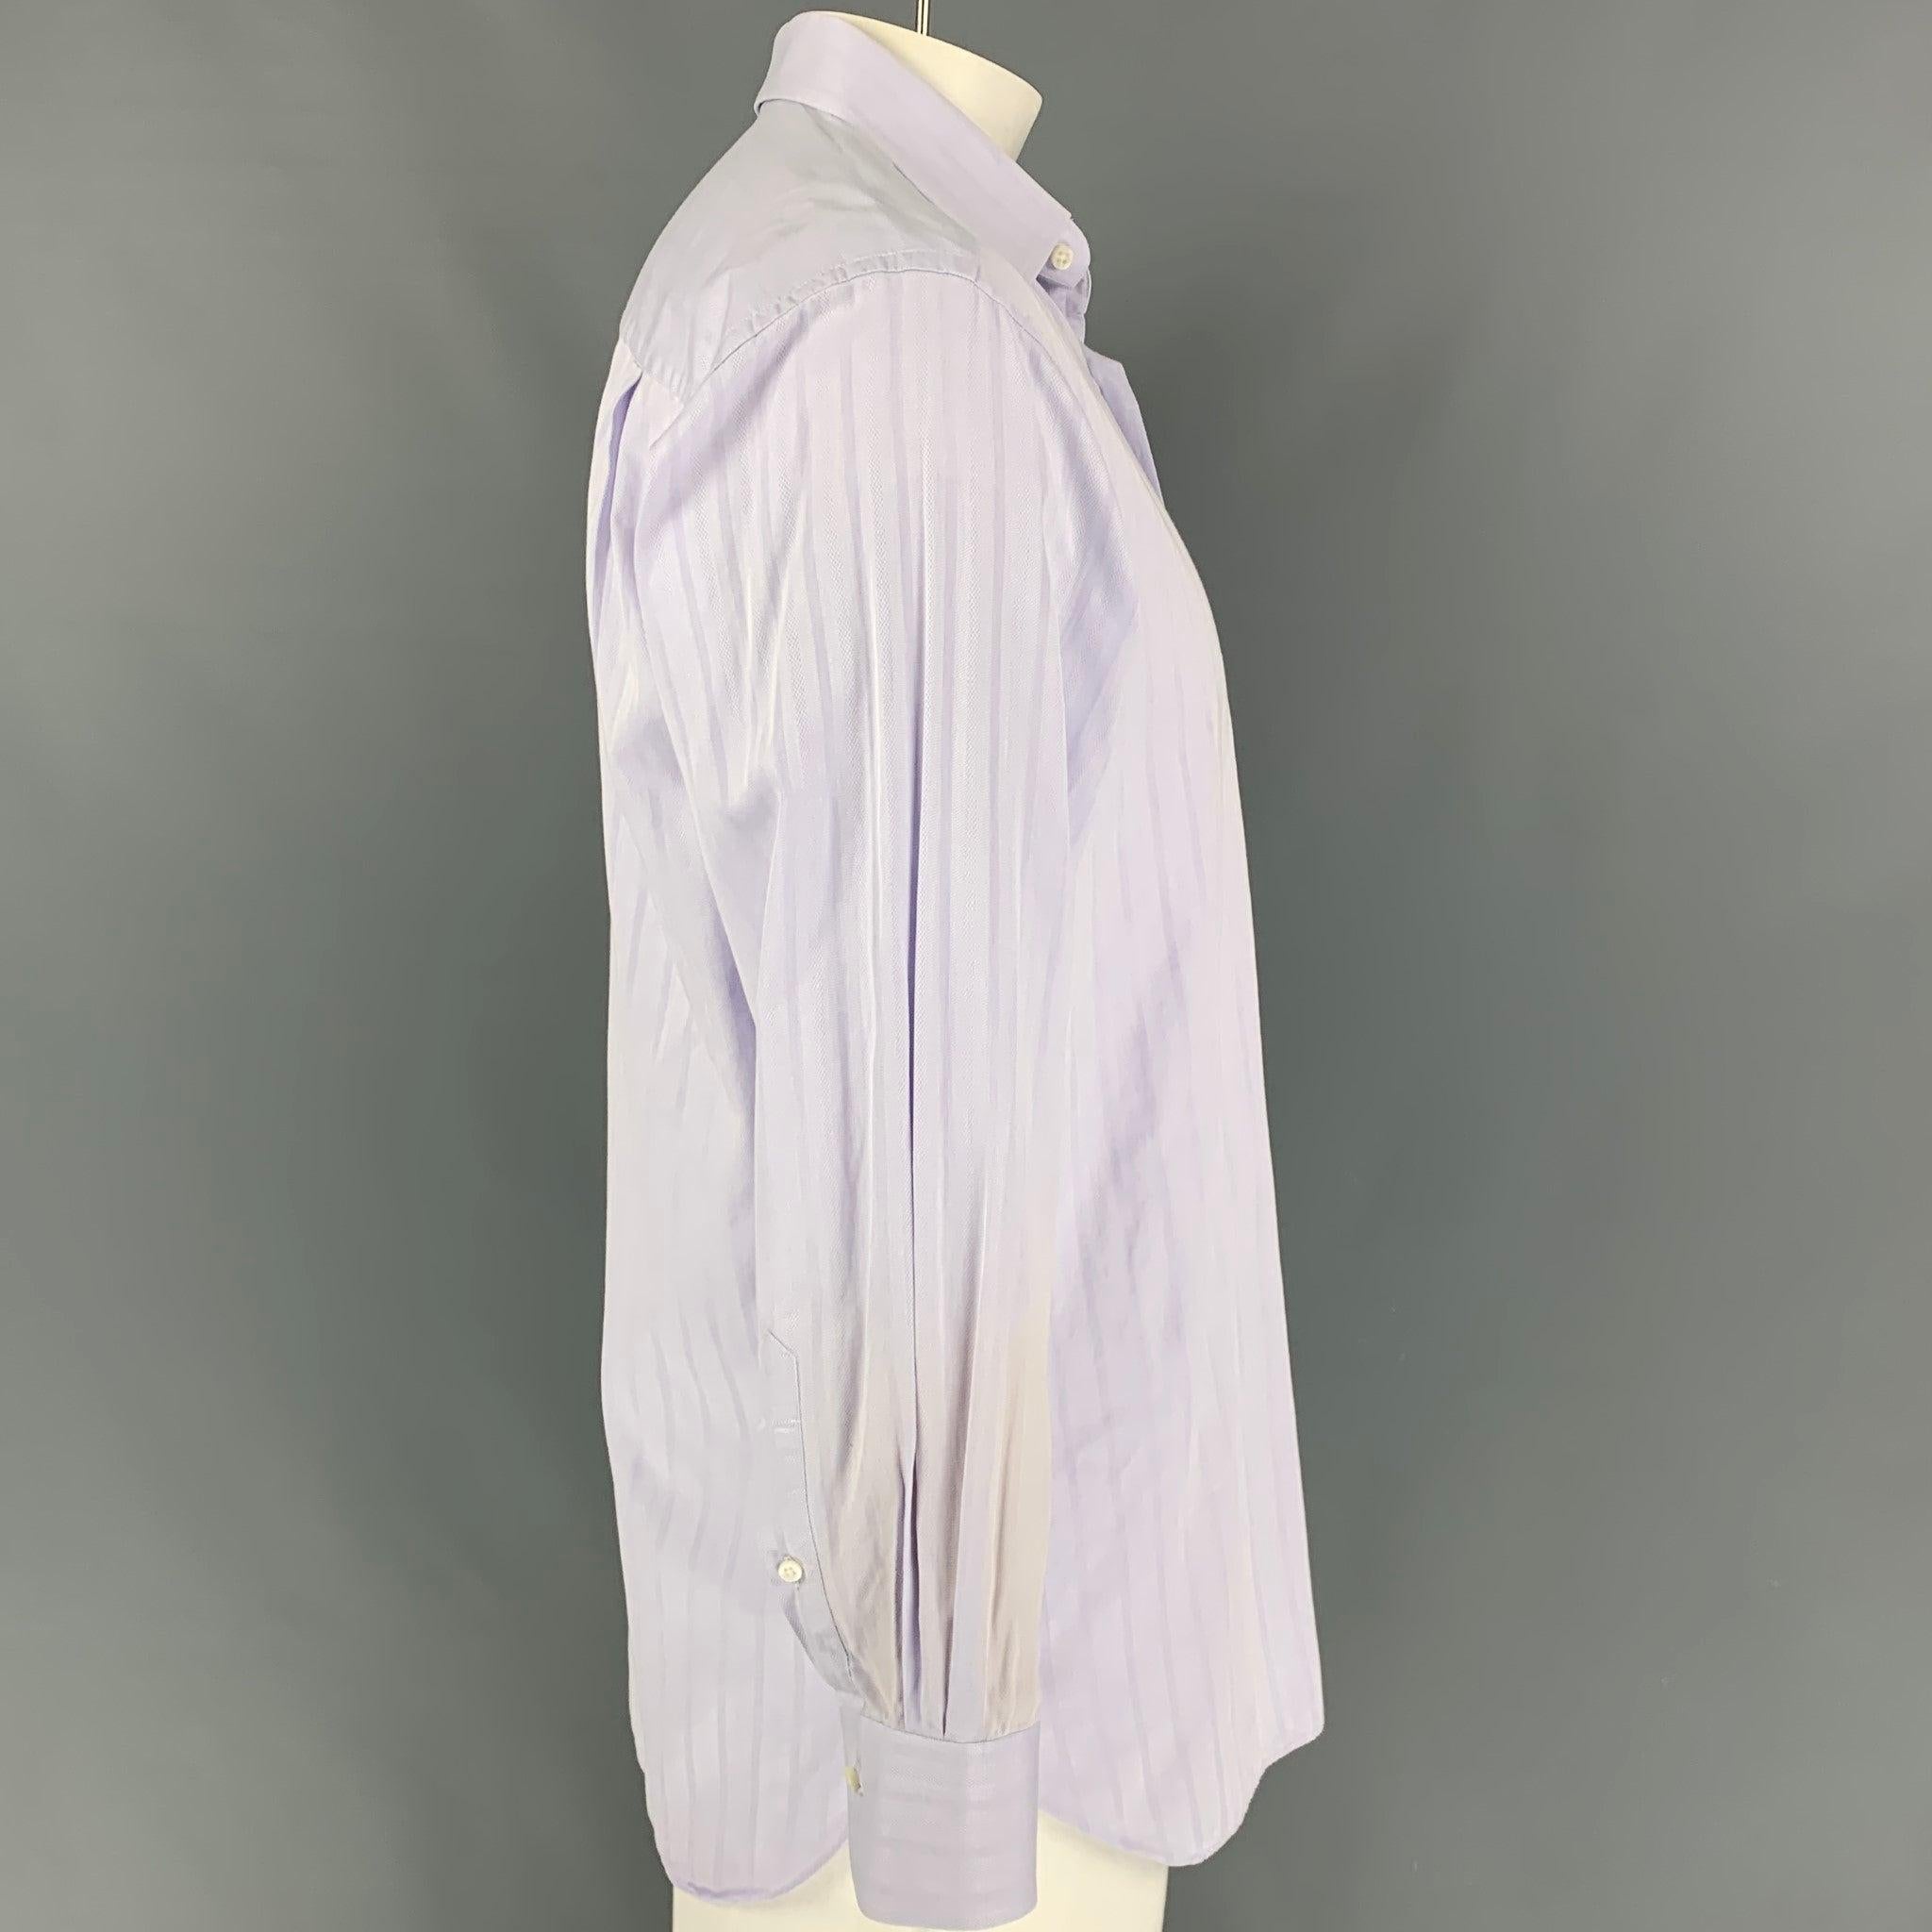 ERMENEGILDO ZEGNA long sleeve shirt comes in a purple cotton featuring a spread collar, front pocket, and a button up closure.
Very Good
Pre-Owned Condition. 

Marked:   41/16 

Measurements: 
 
Shoulder: 19 inches  Chest: 44 inches  Sleeve: 24